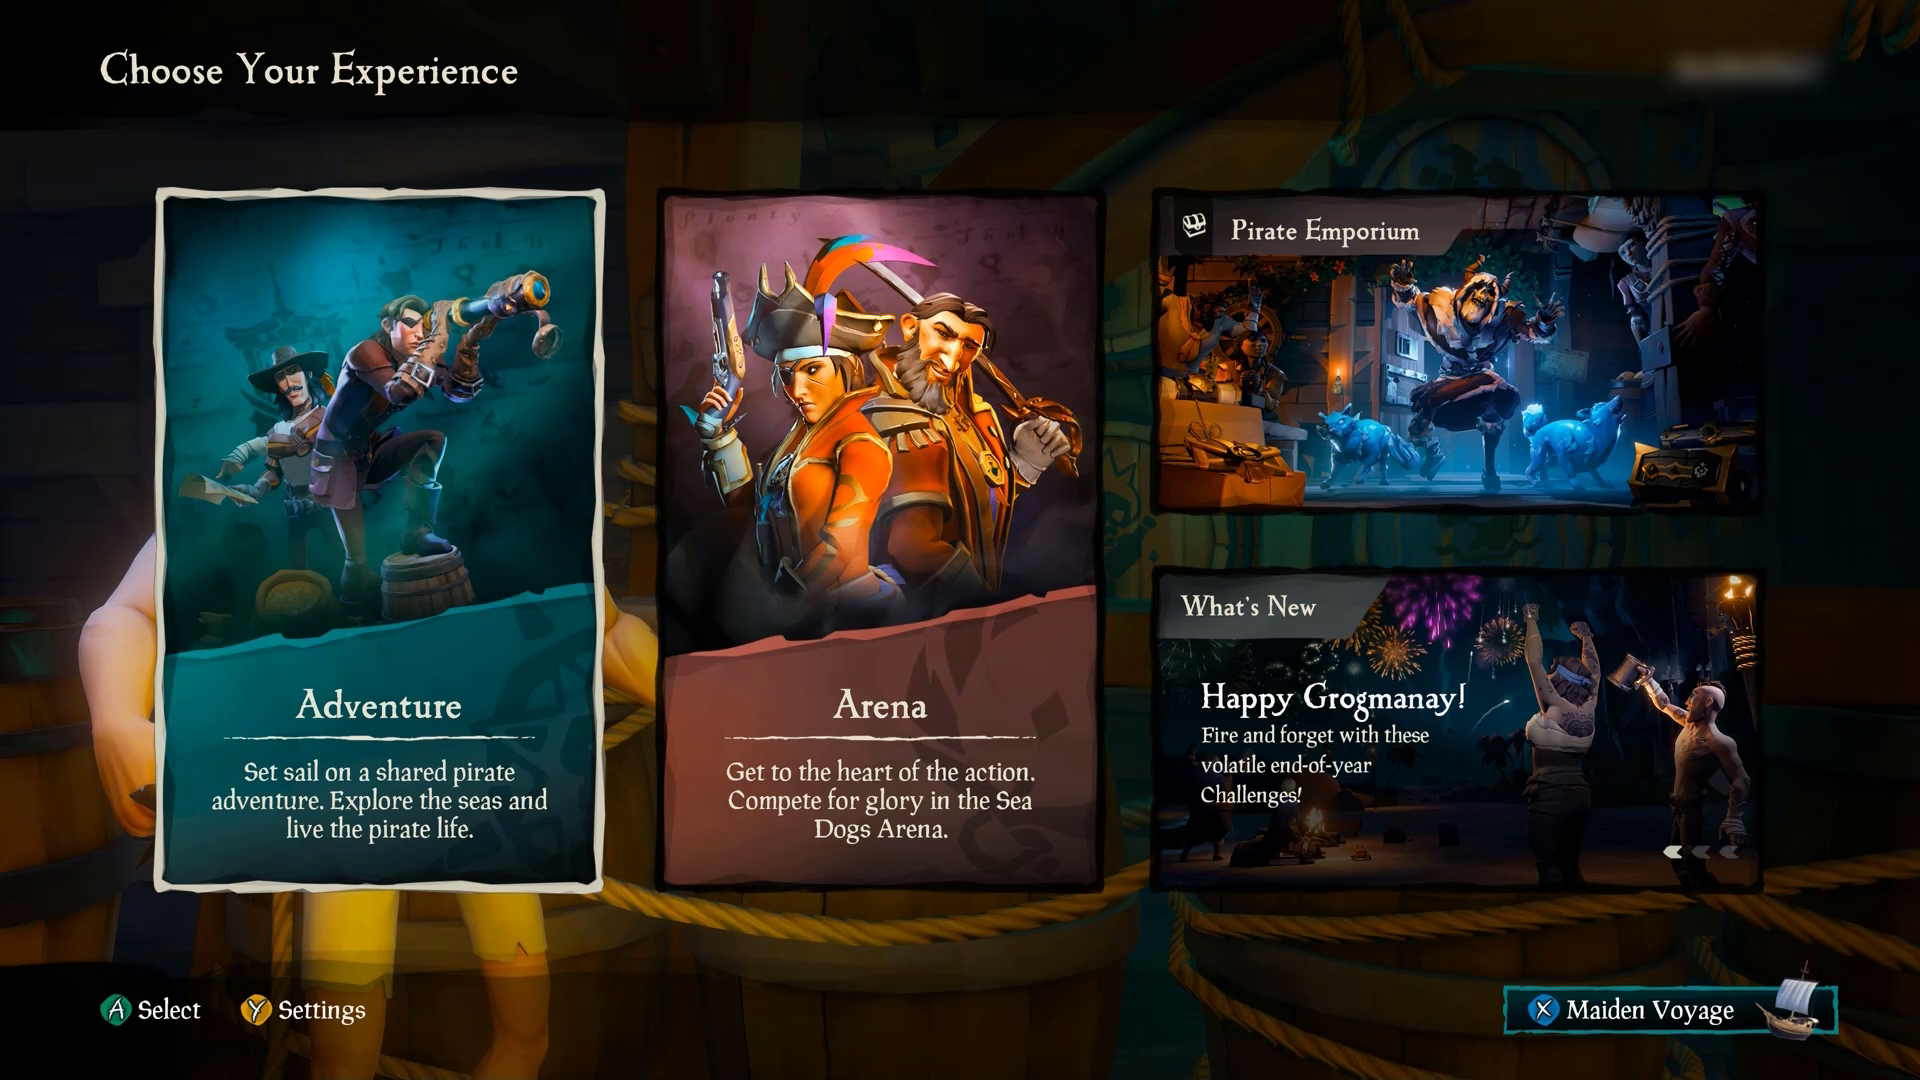 A screenshot of the Sea of Thieves "Choose your experience" menu. The "Adventure" game option has focus.